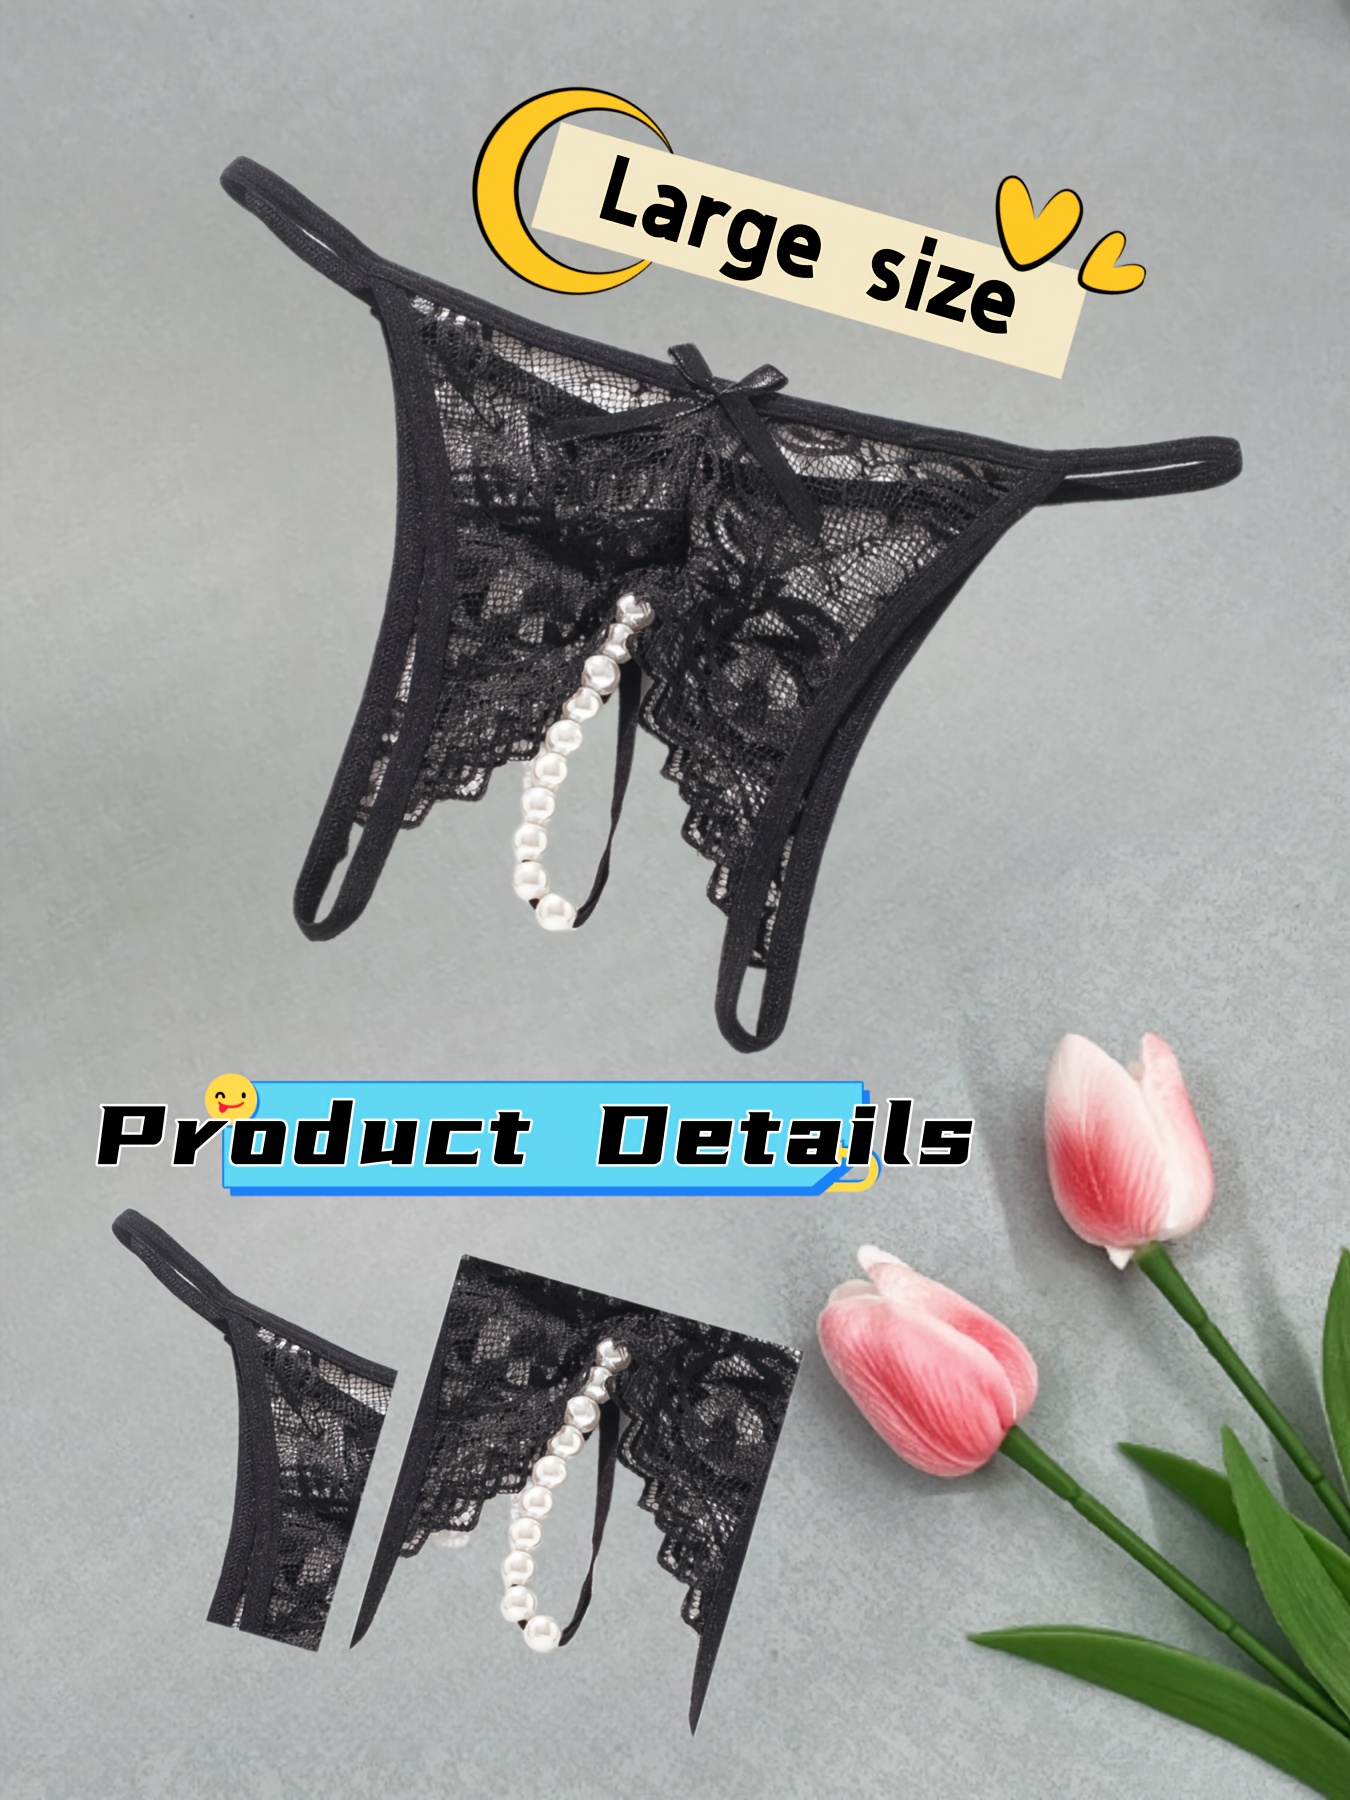 5pcs New Women's Lace Crotchless Underwear Thongs Lingerie G-string Floral  Brief